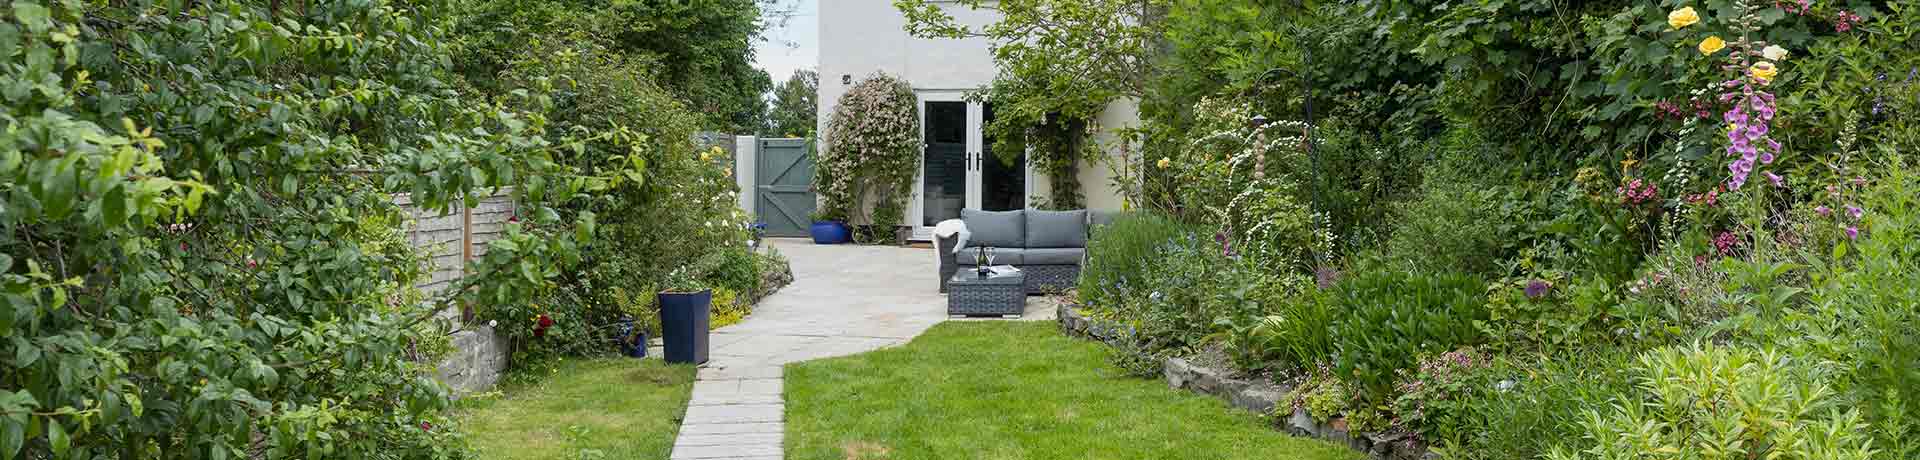 Dog friendly cottages in Cornwall with an enclosed garden.